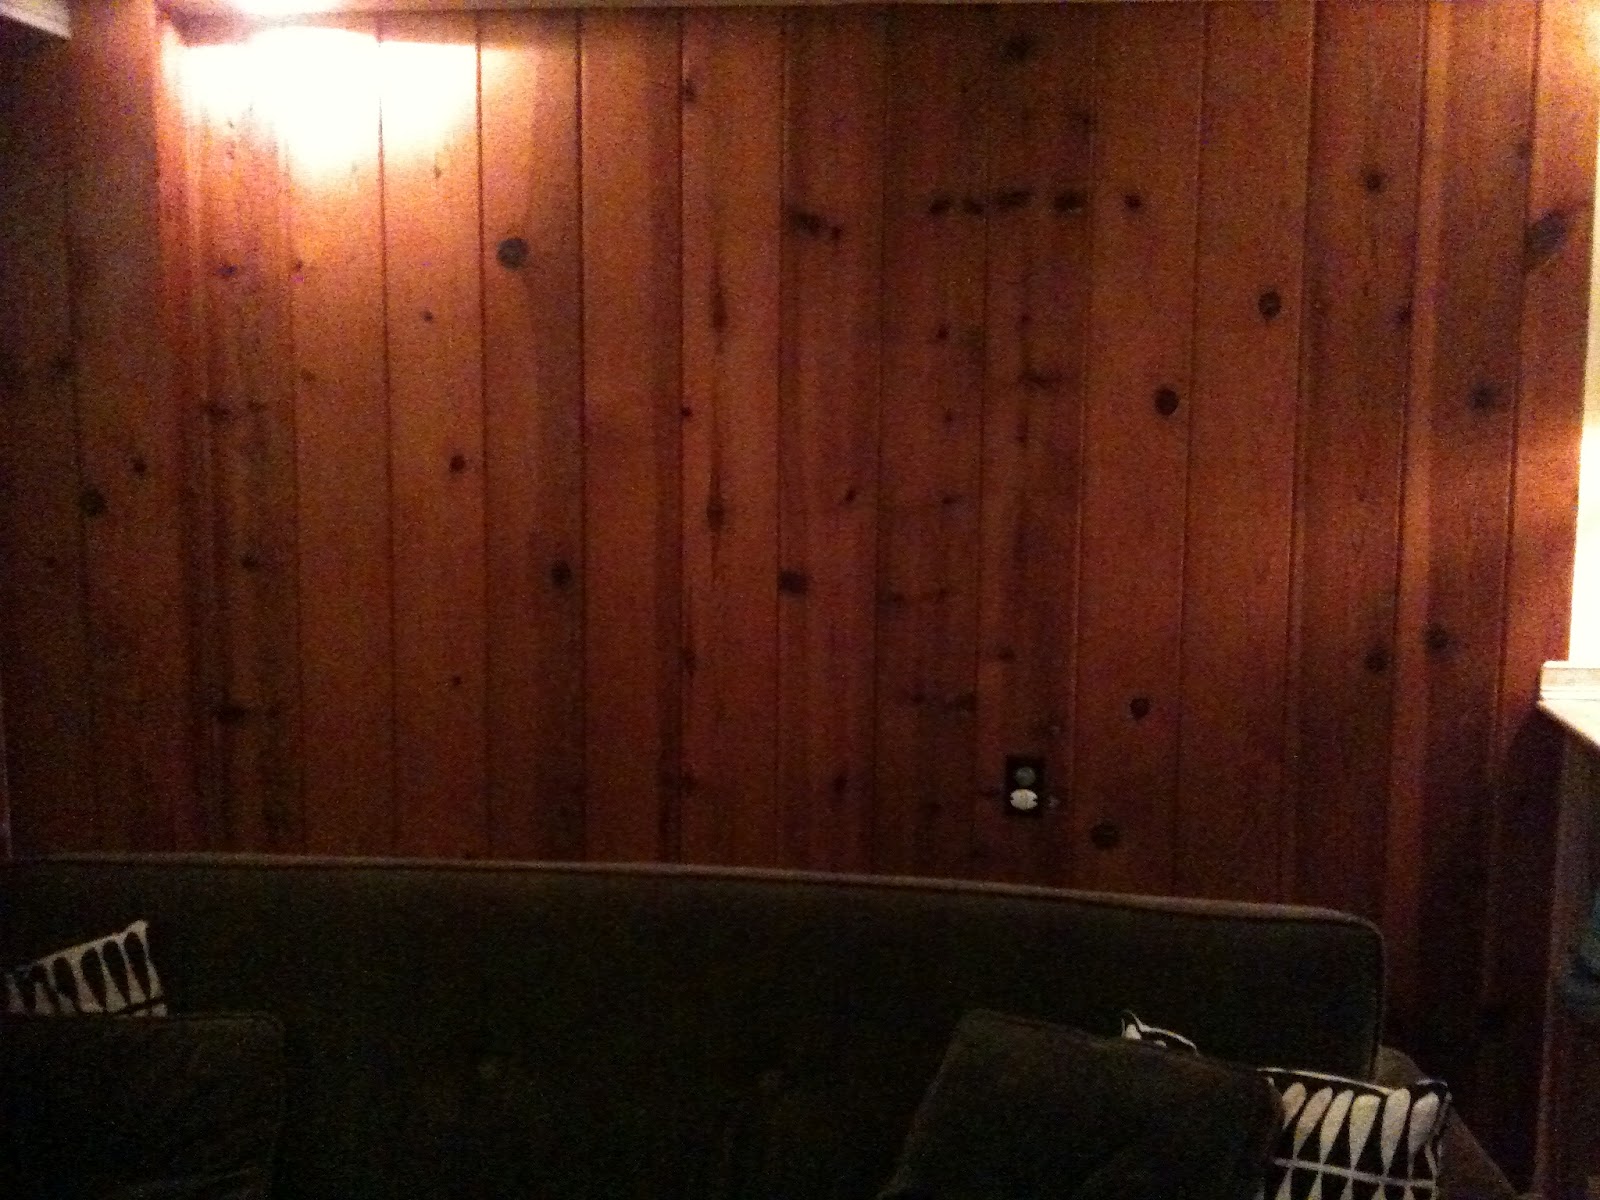 ... pine wall that I can't bear to paint over - but it's awfully dark